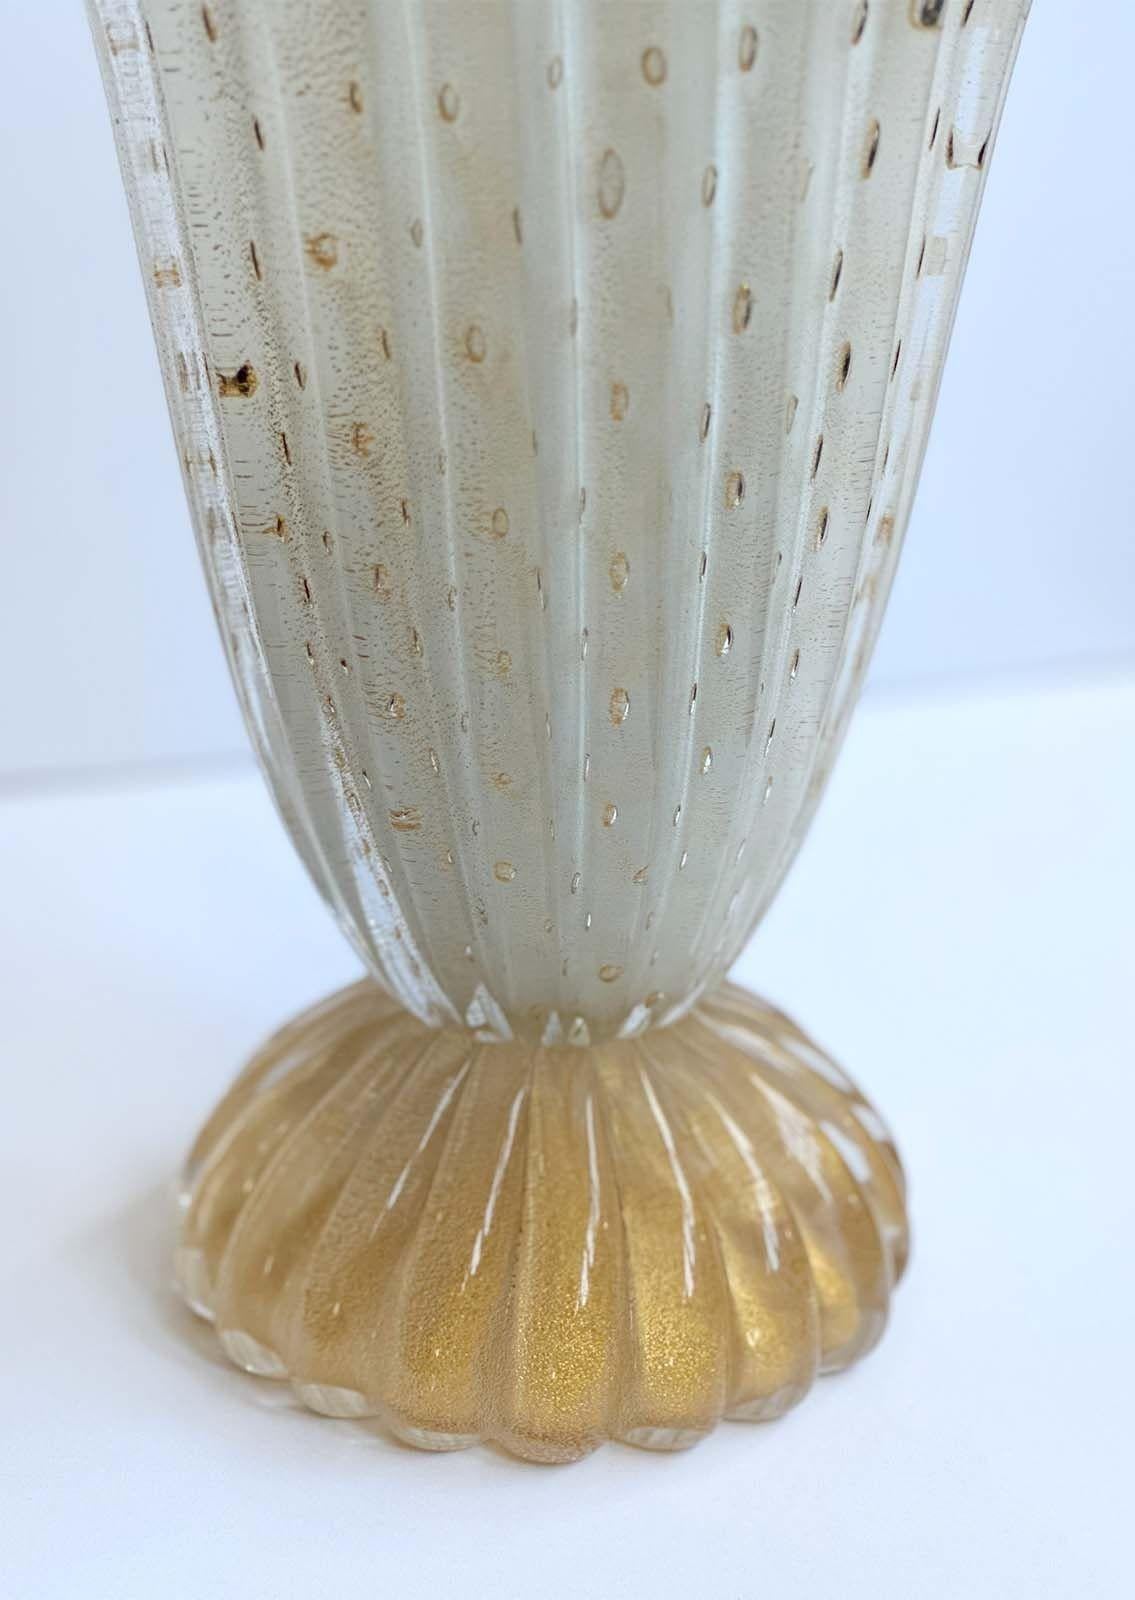 Vintage Italian Murano glass vase in Bollicine technique infused with gold flecks by Tosi Murano. Made in Italy, c. 1950's.
*Signed on base 
Dimensions:
14.5